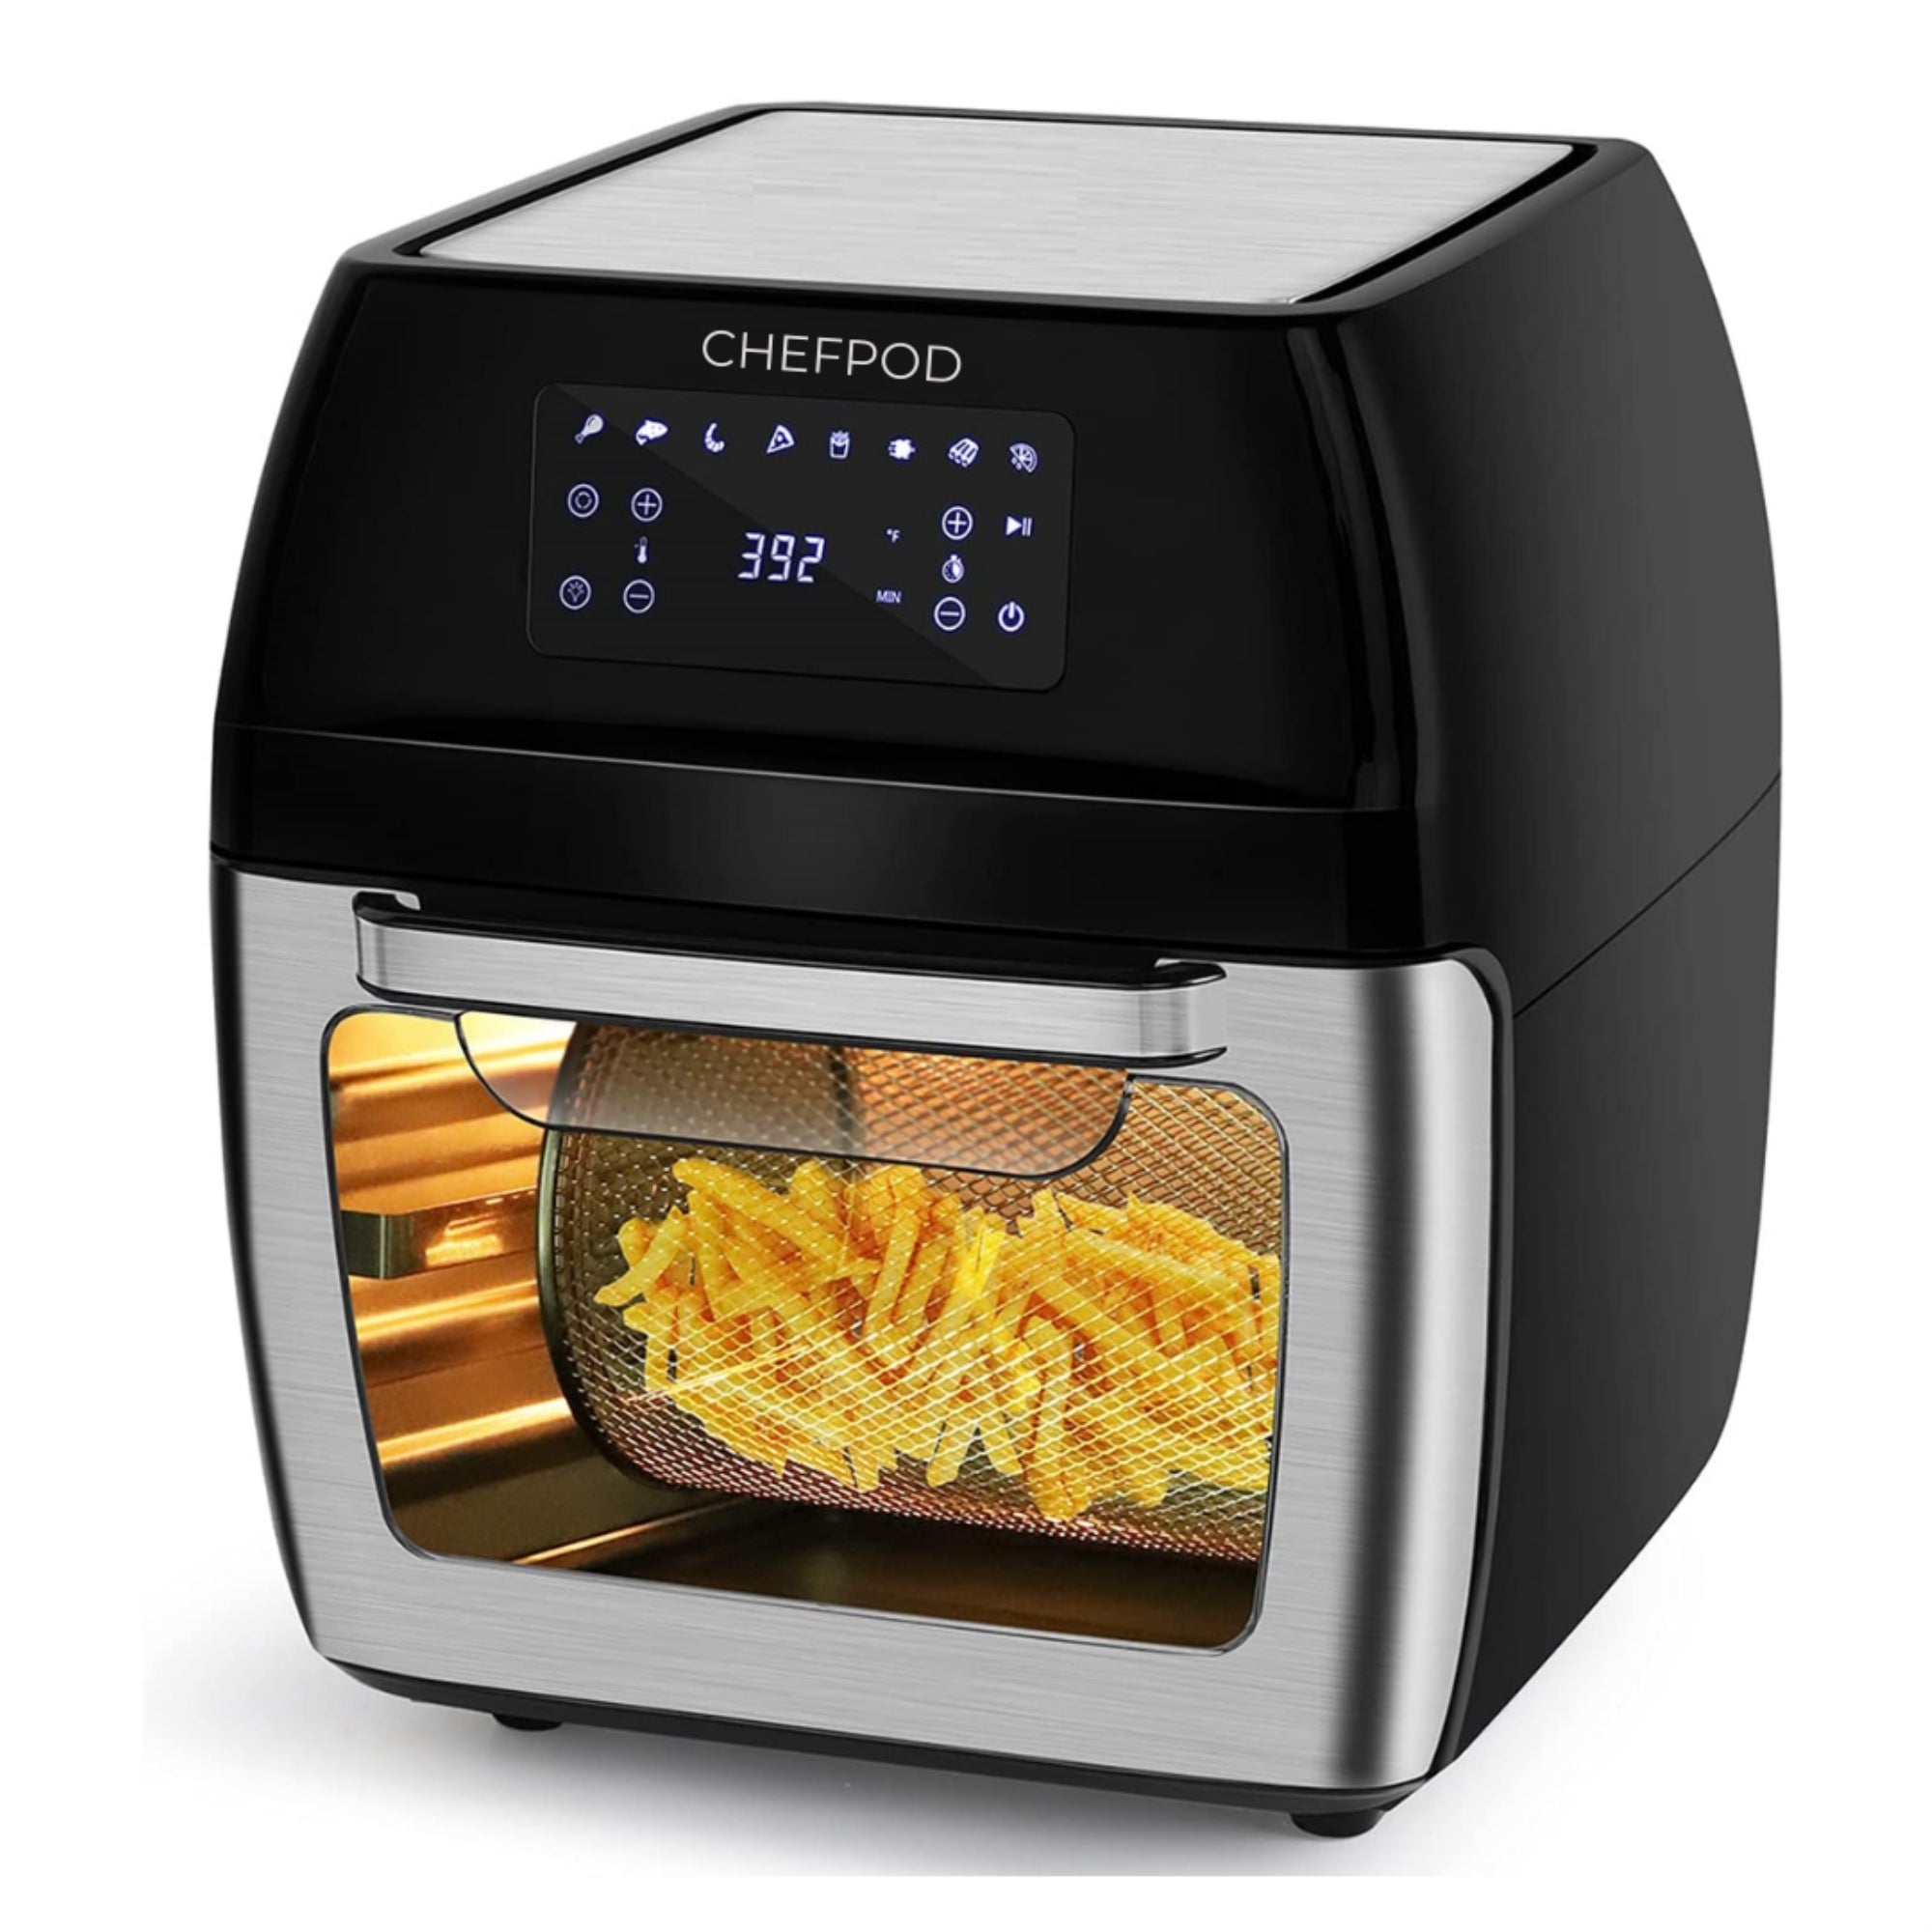 Air Fryer Oven Large 20 Quart 10-in-1 Digital Convection Oven Air